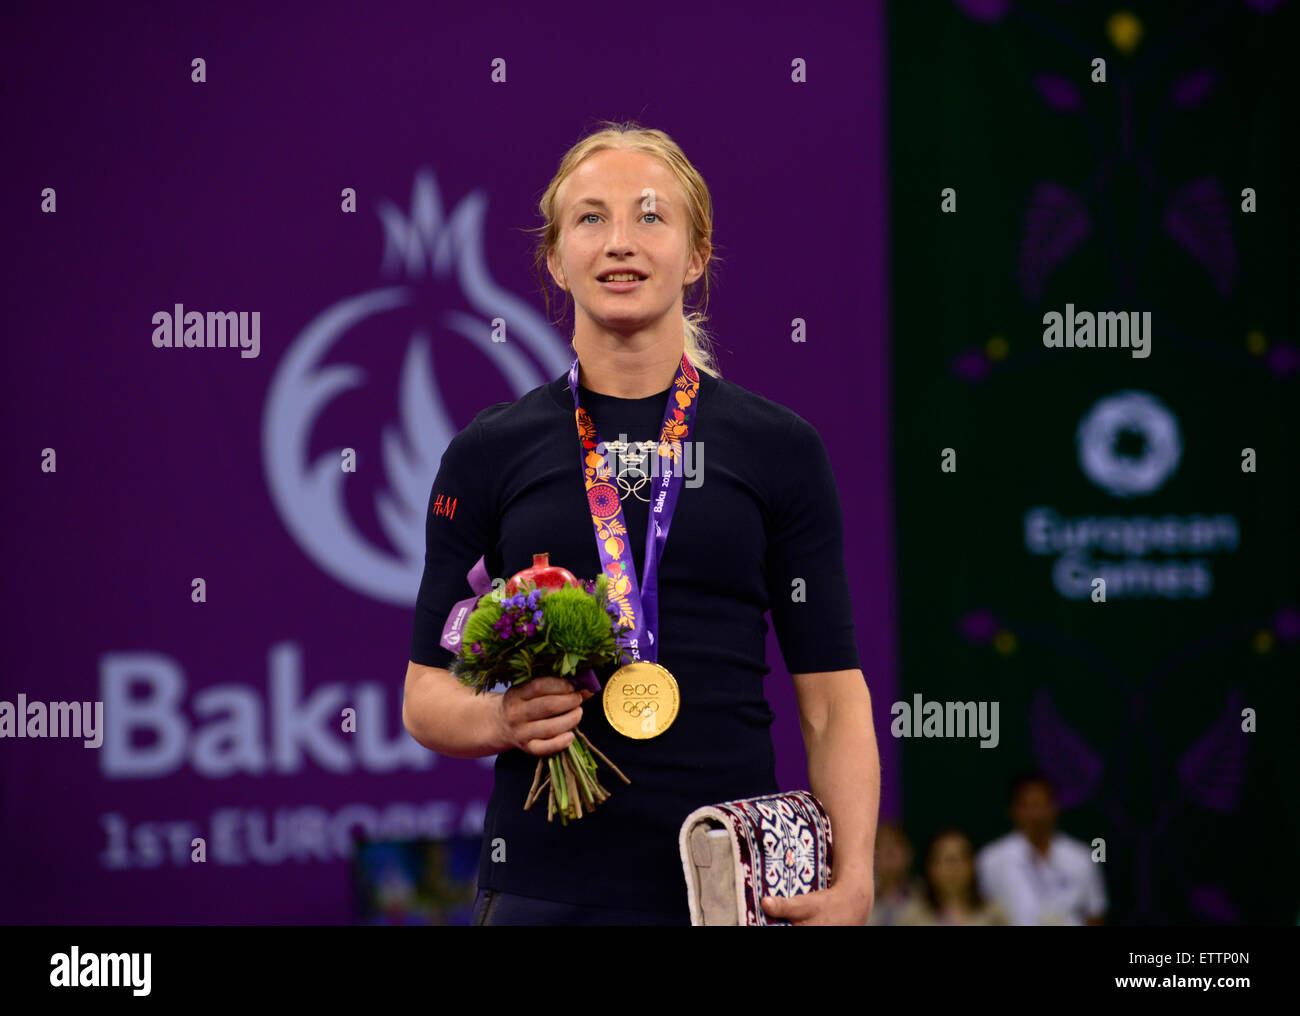 Baku. 15th June, 2015. Mattson Sofia of Sweden reacts during the awarding ceremony of the women's 55kg wrestling event at the European Games in Azerbaijan's capital of Baku on June 15, 2015. Mattson Sofia won the gold medal. Credit:  Tofik Babayev/Xinhua/Alamy Live News Stock Photo